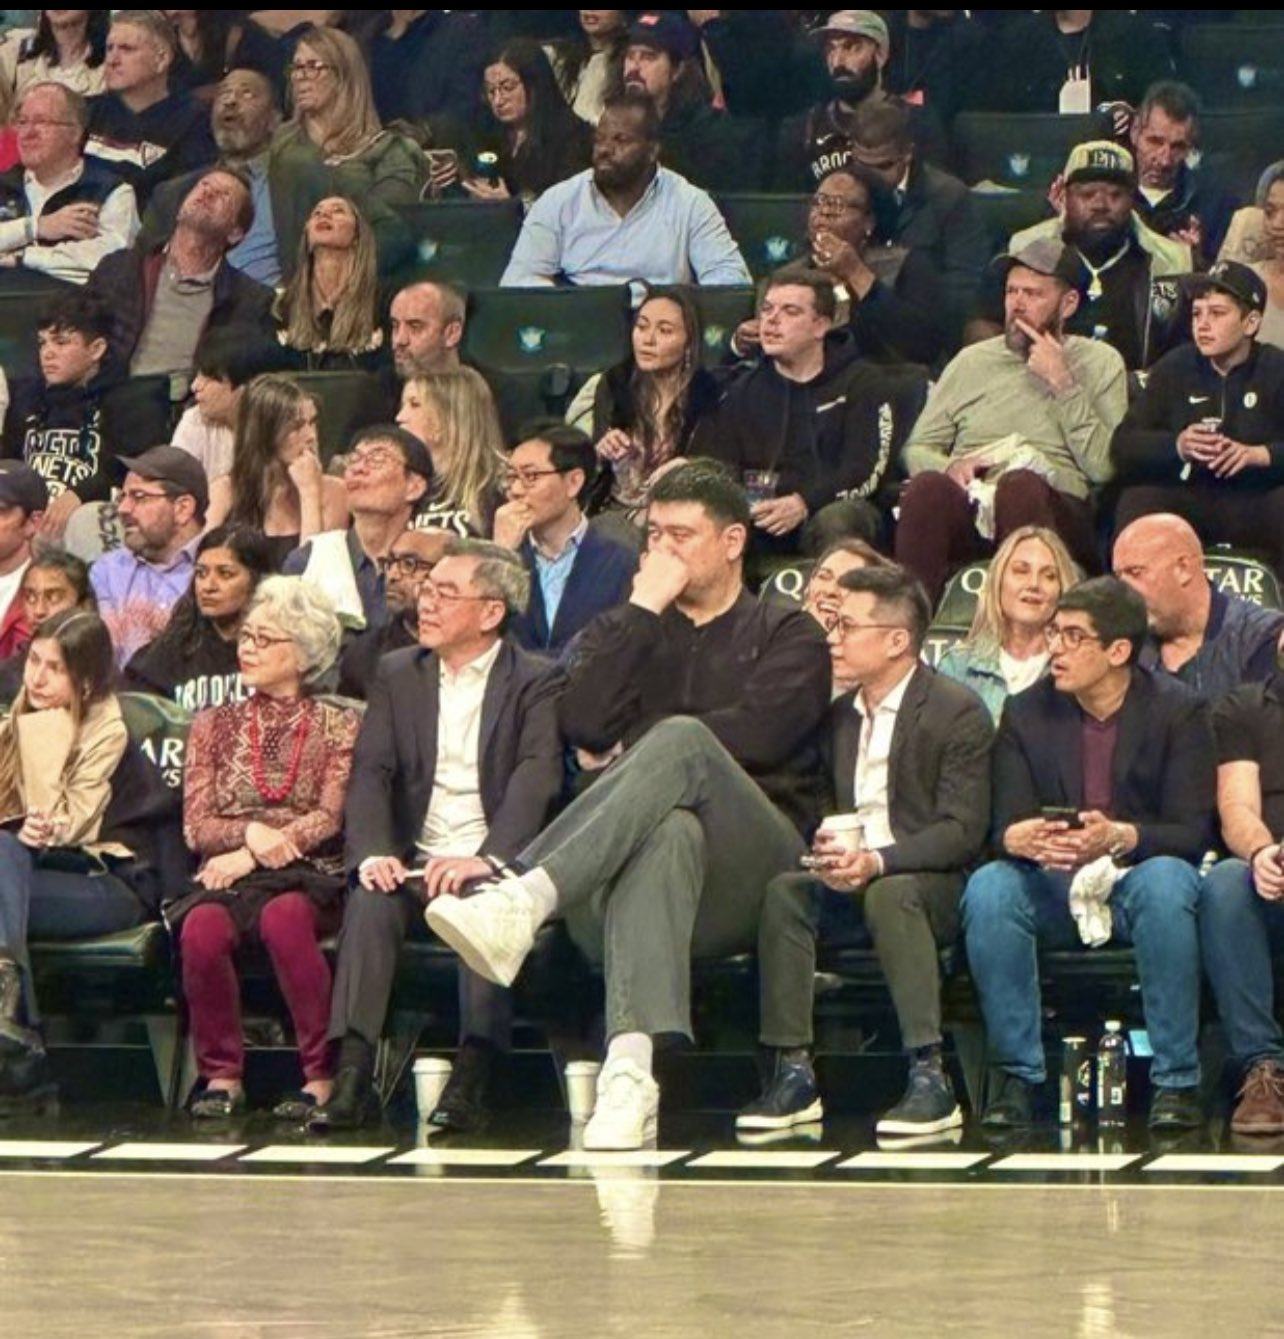 Yao Ming casts a towering figure as he sits courtside at the Barclays Centre. Photo: X/@BusterScher